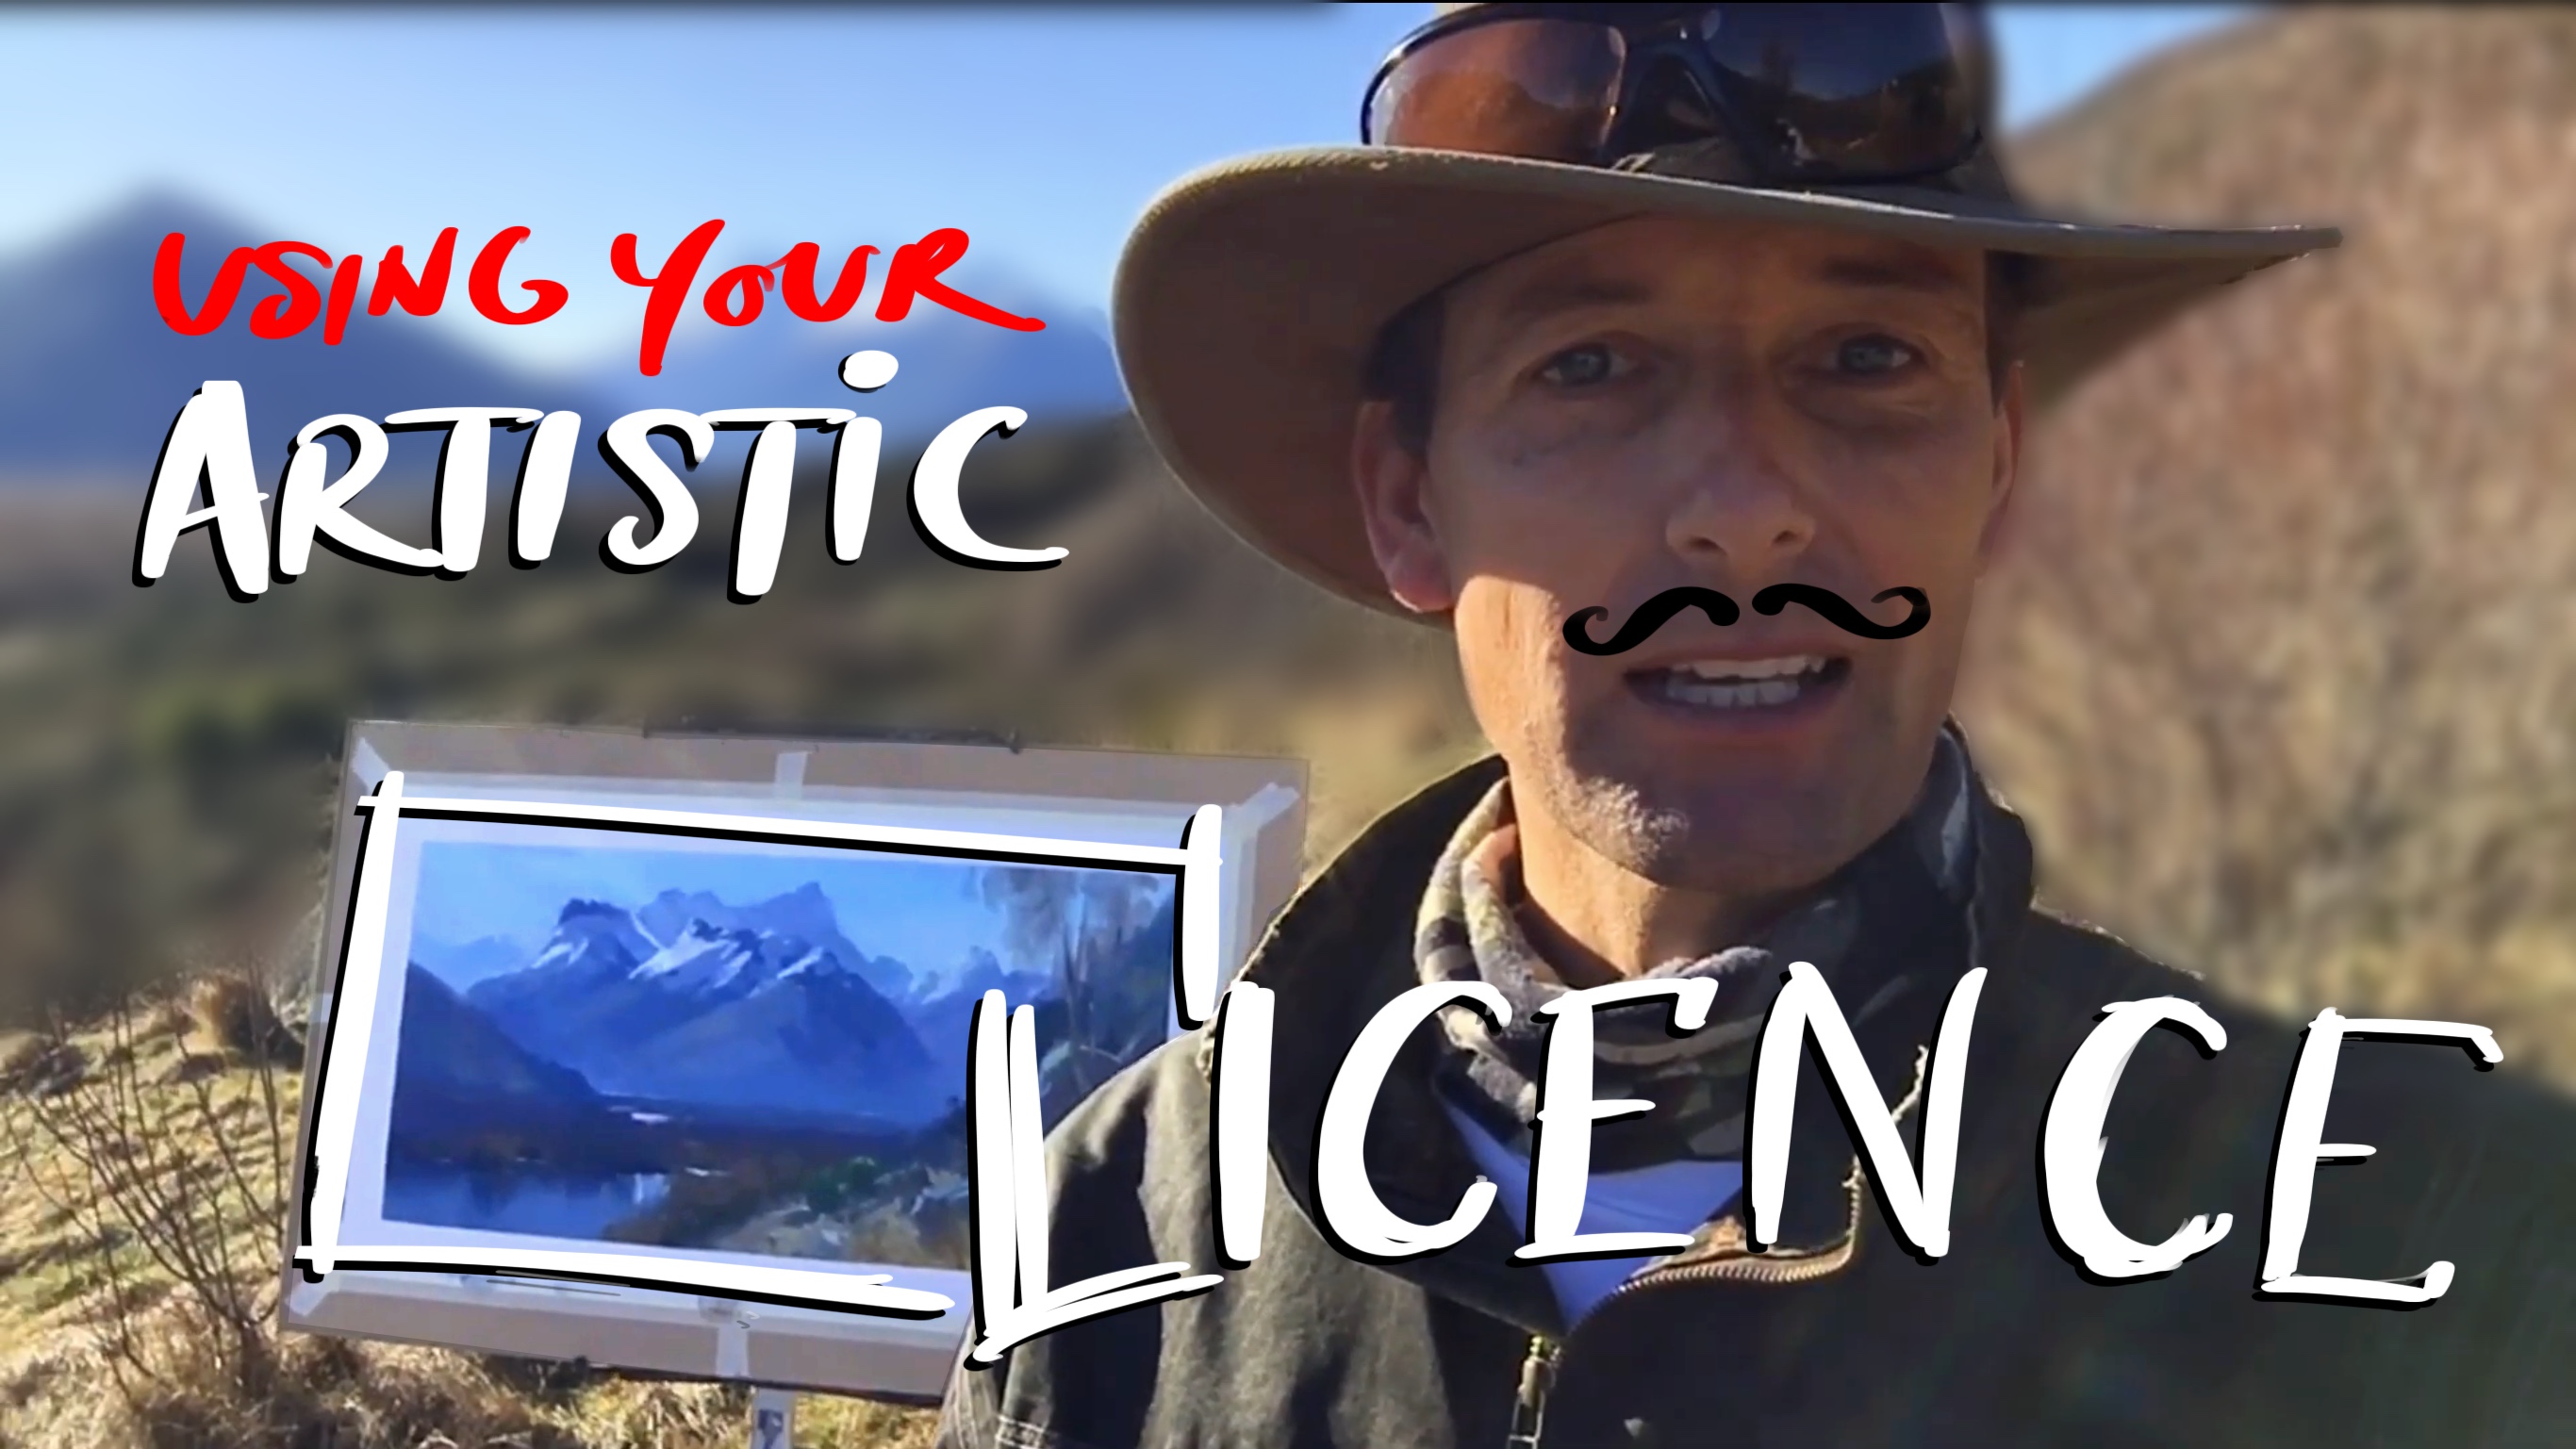 Using your artistic licence logo